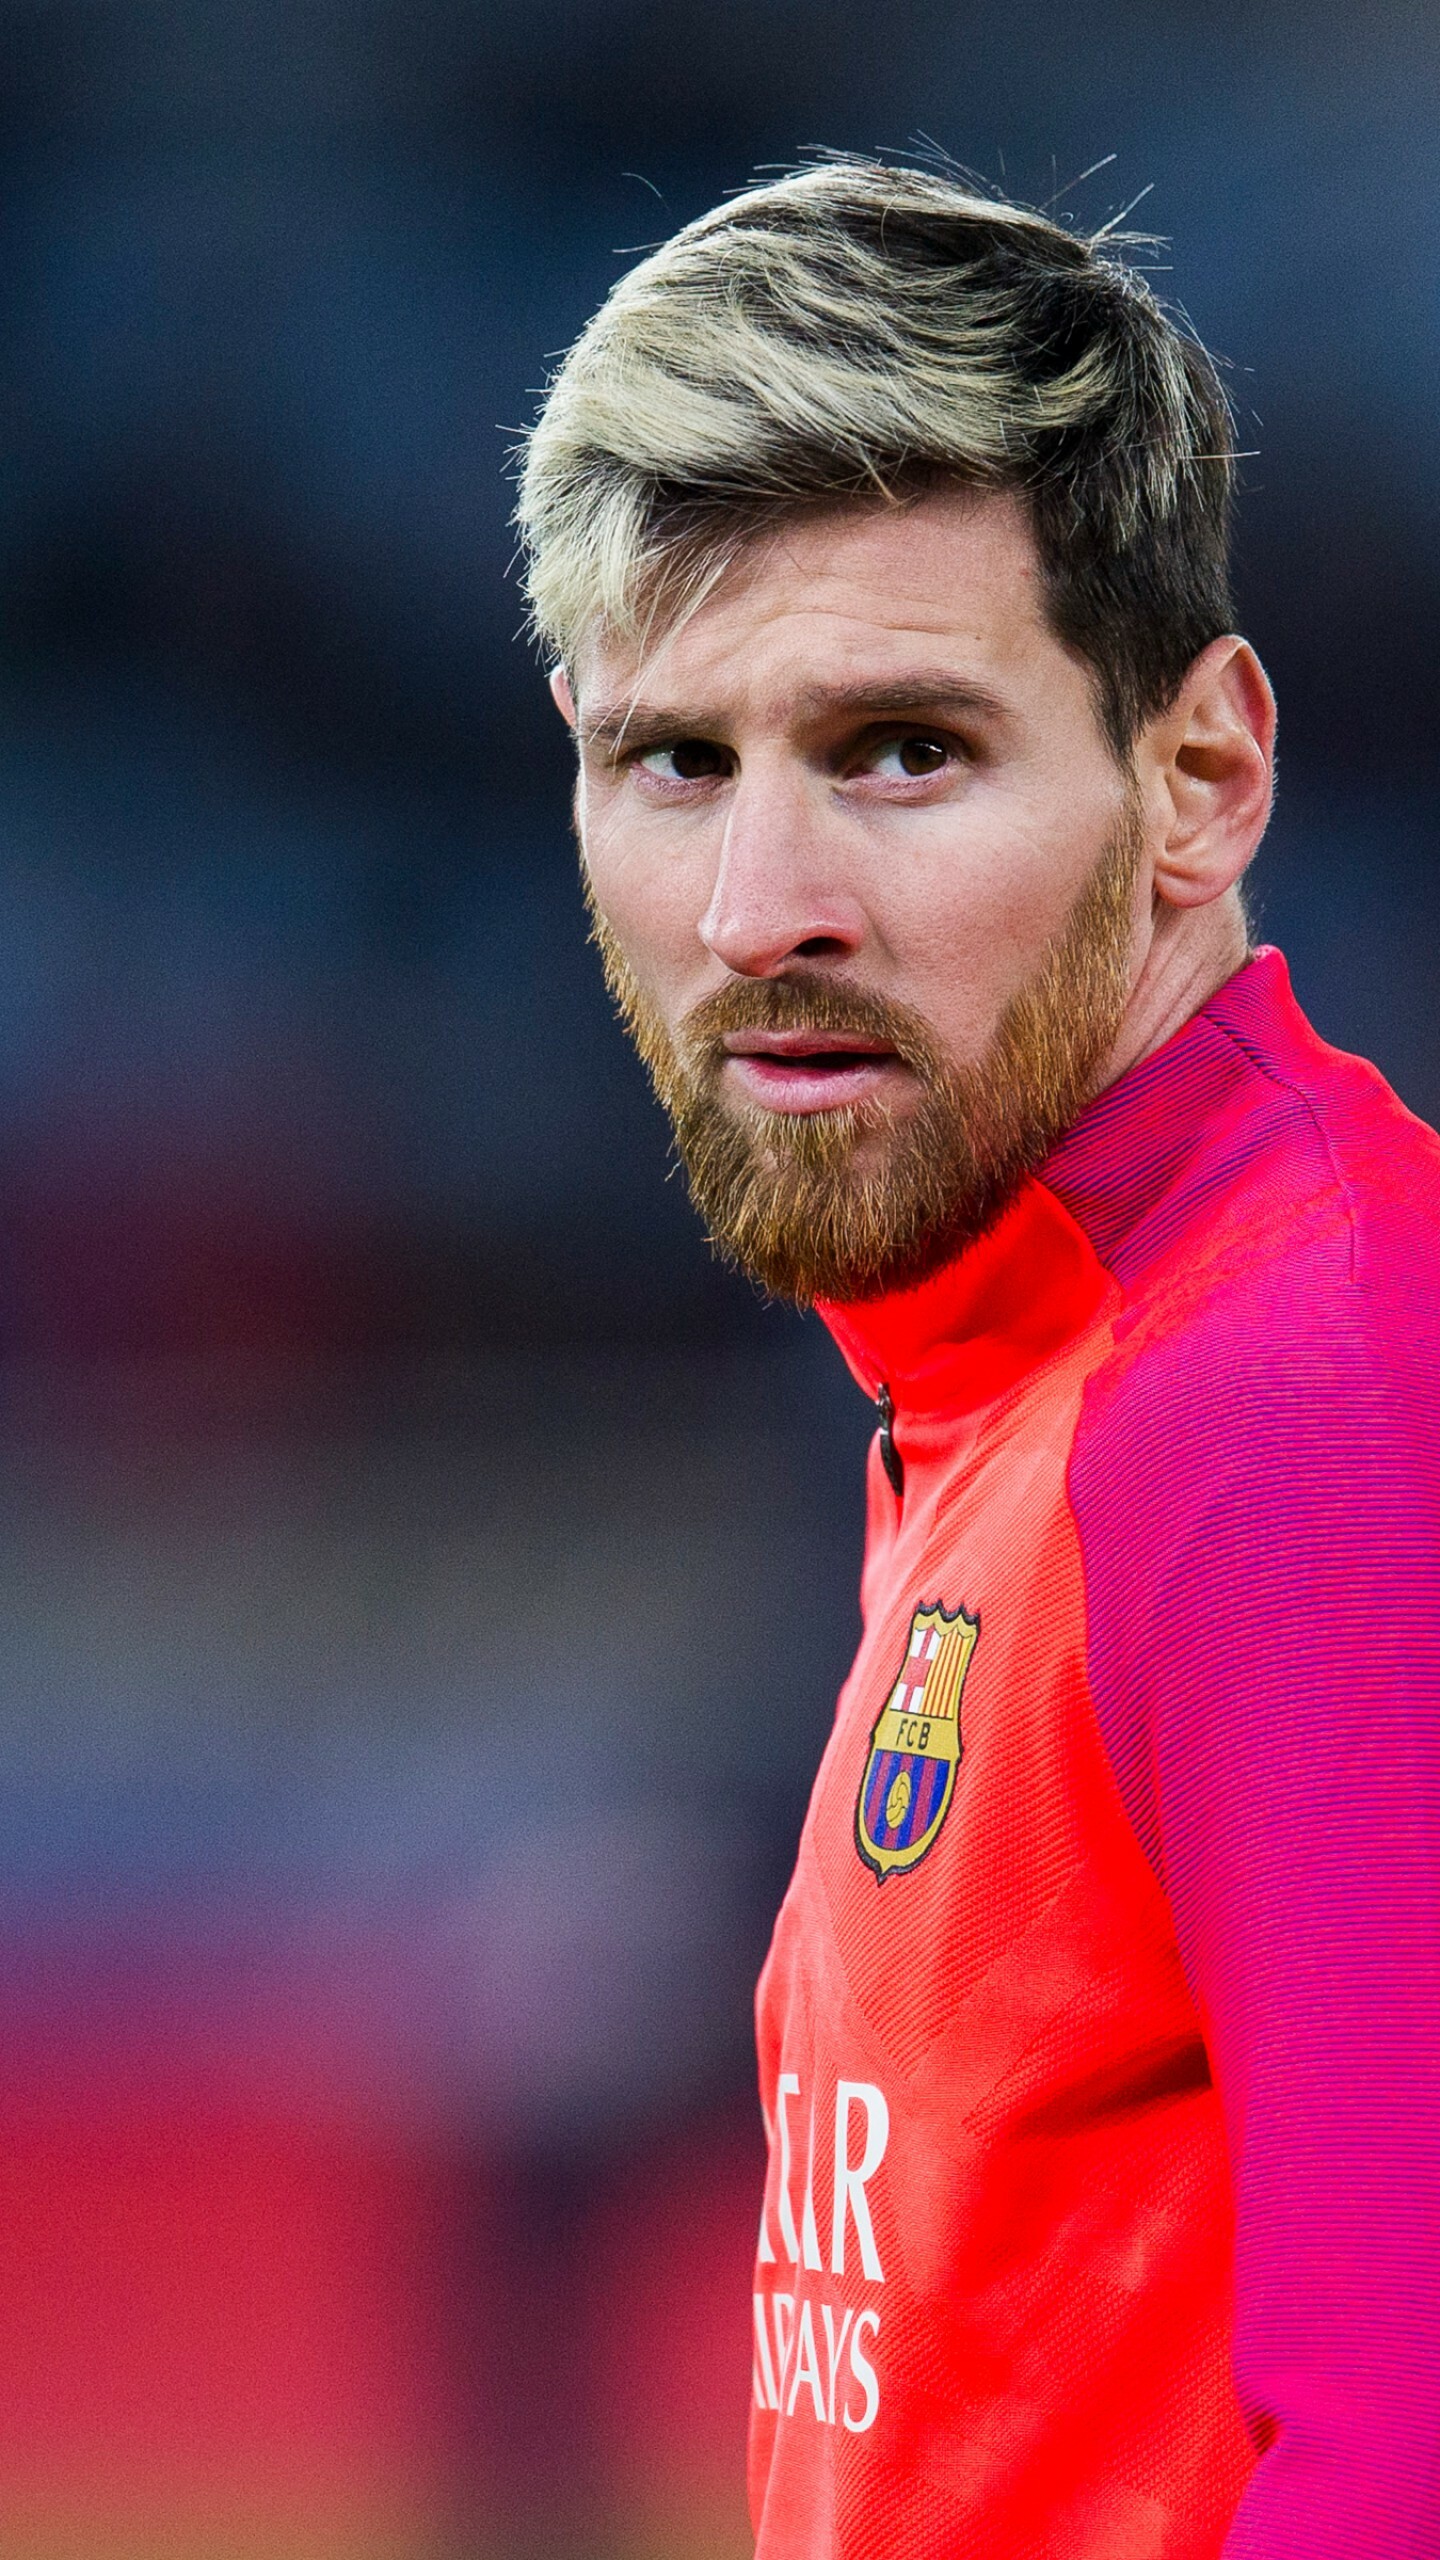 Lionel Messi: Barcelona FC, Soccer, He holds the record for most hat-tricks in La Liga (36). 1440x2560 HD Wallpaper.